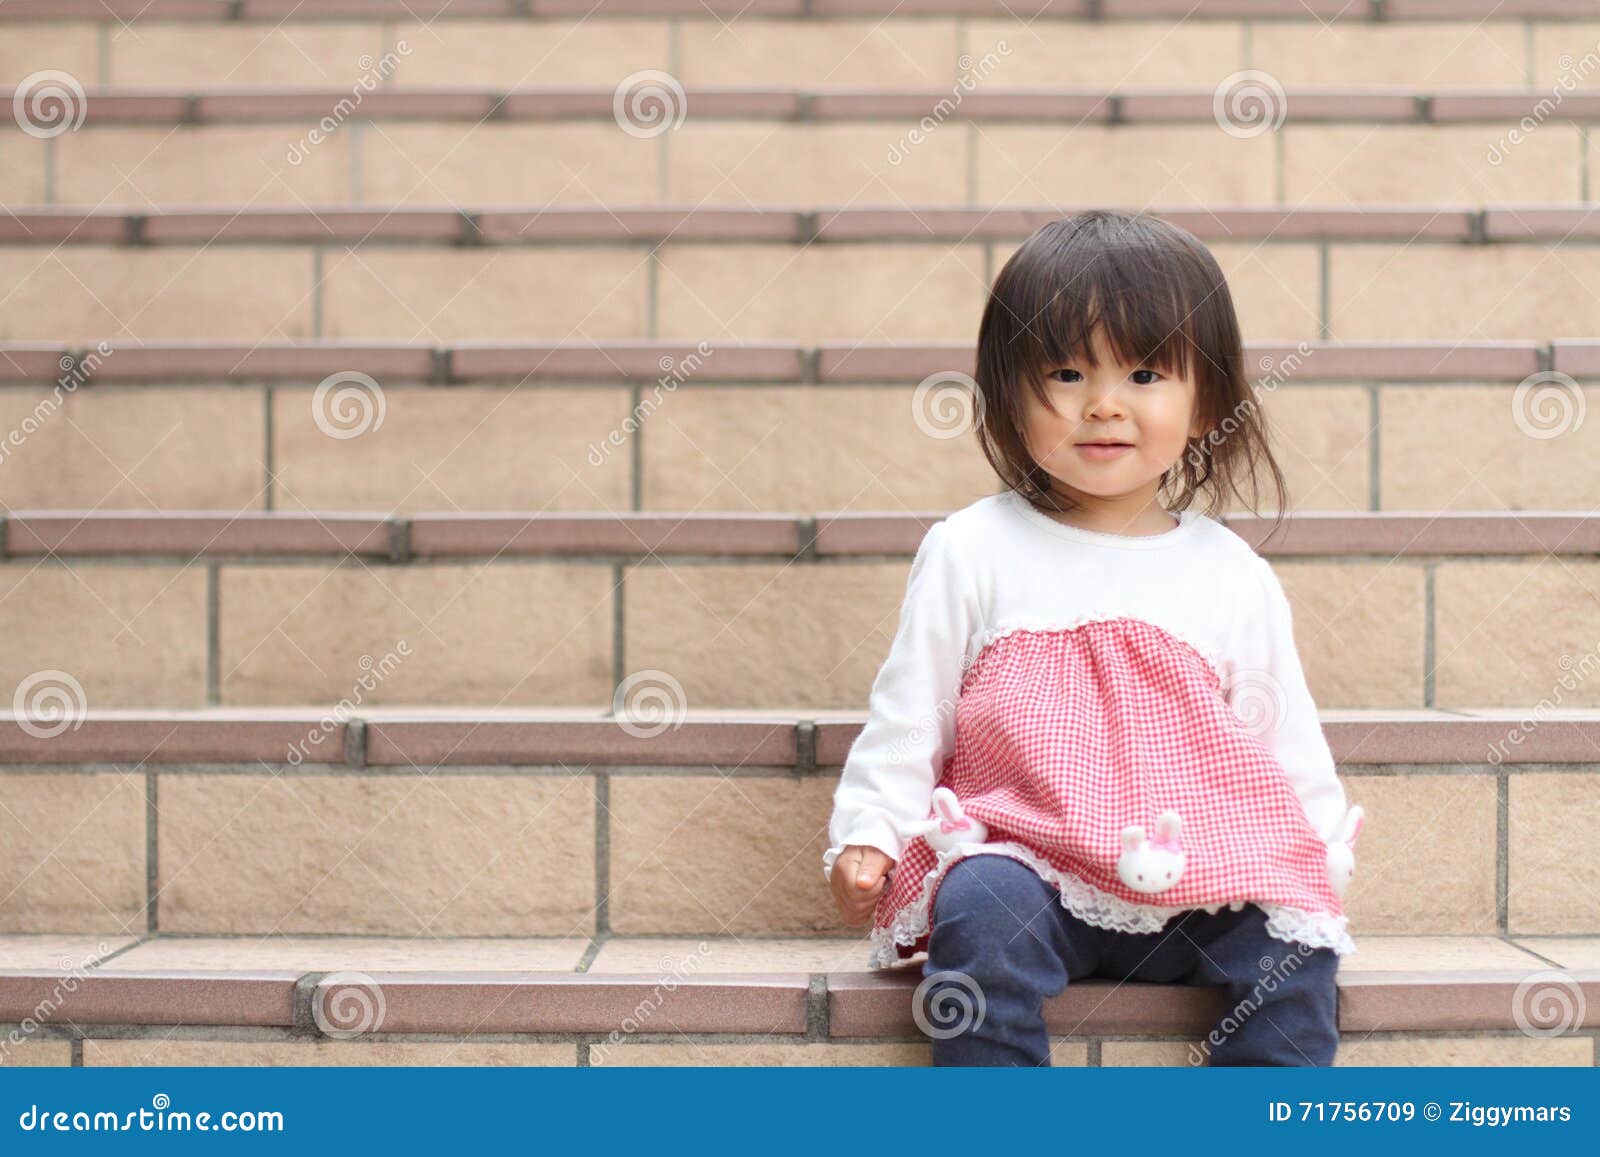 Cute japanese girl is walking up the stairs in her dress